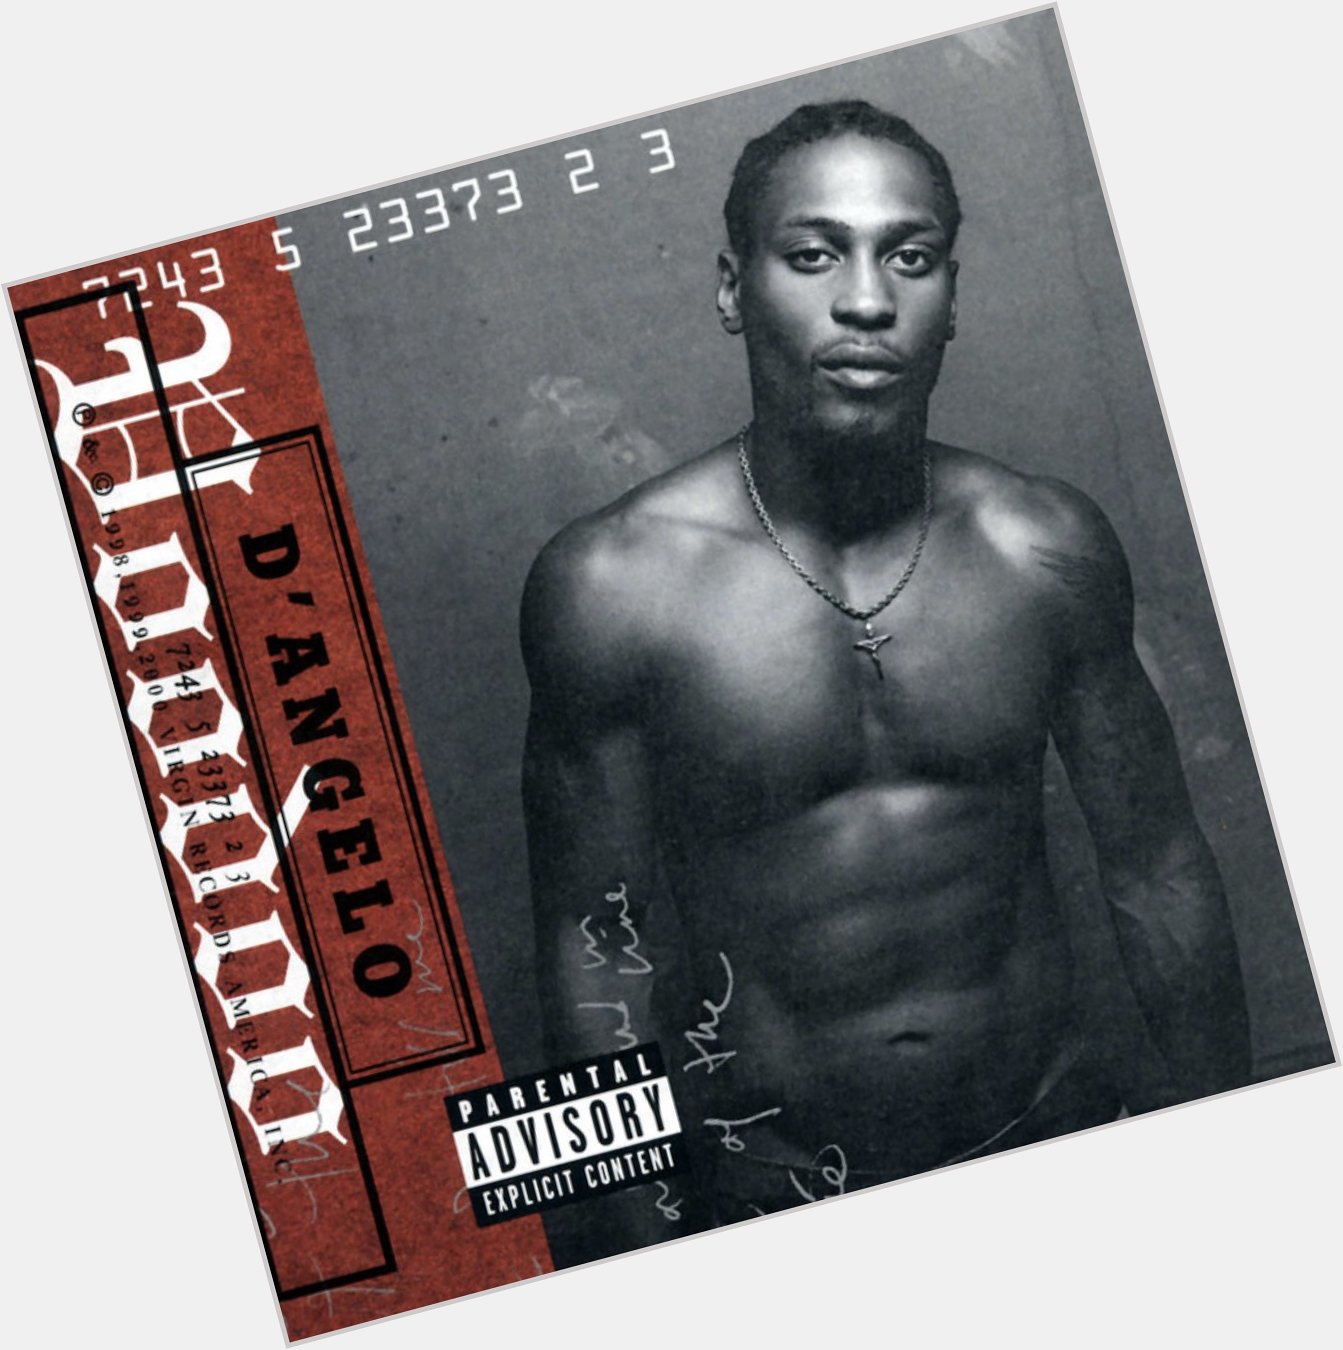 Happy 20th birthday to this masterpiece of an album. D Angelo is a wizard I tell you. A flipping wizard. 